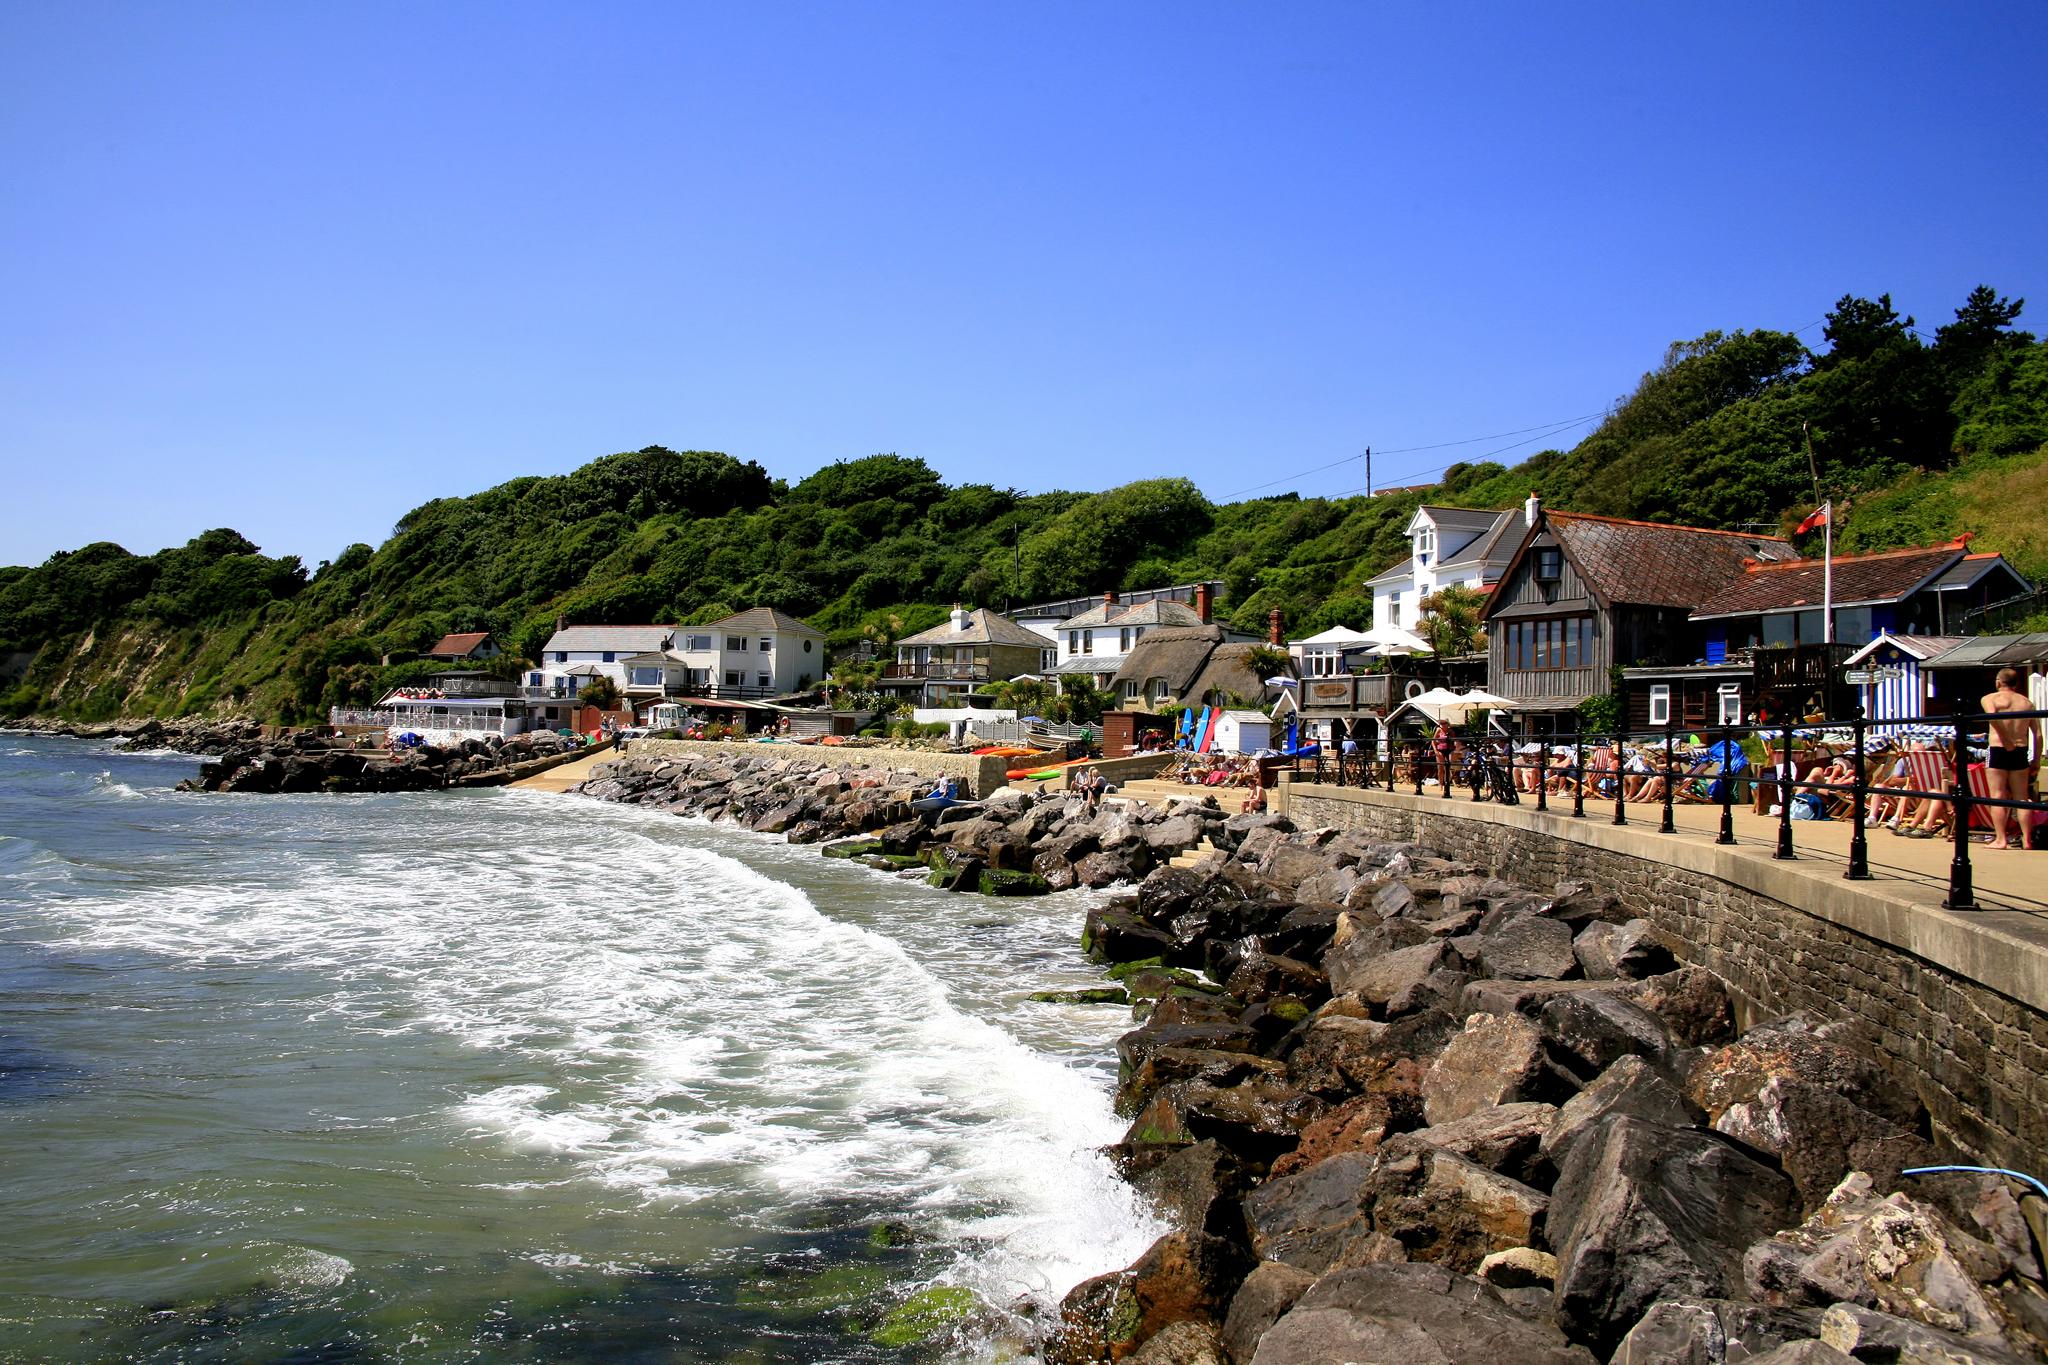 This year’s Ventnor Fringe takes over the town from 9-14 August